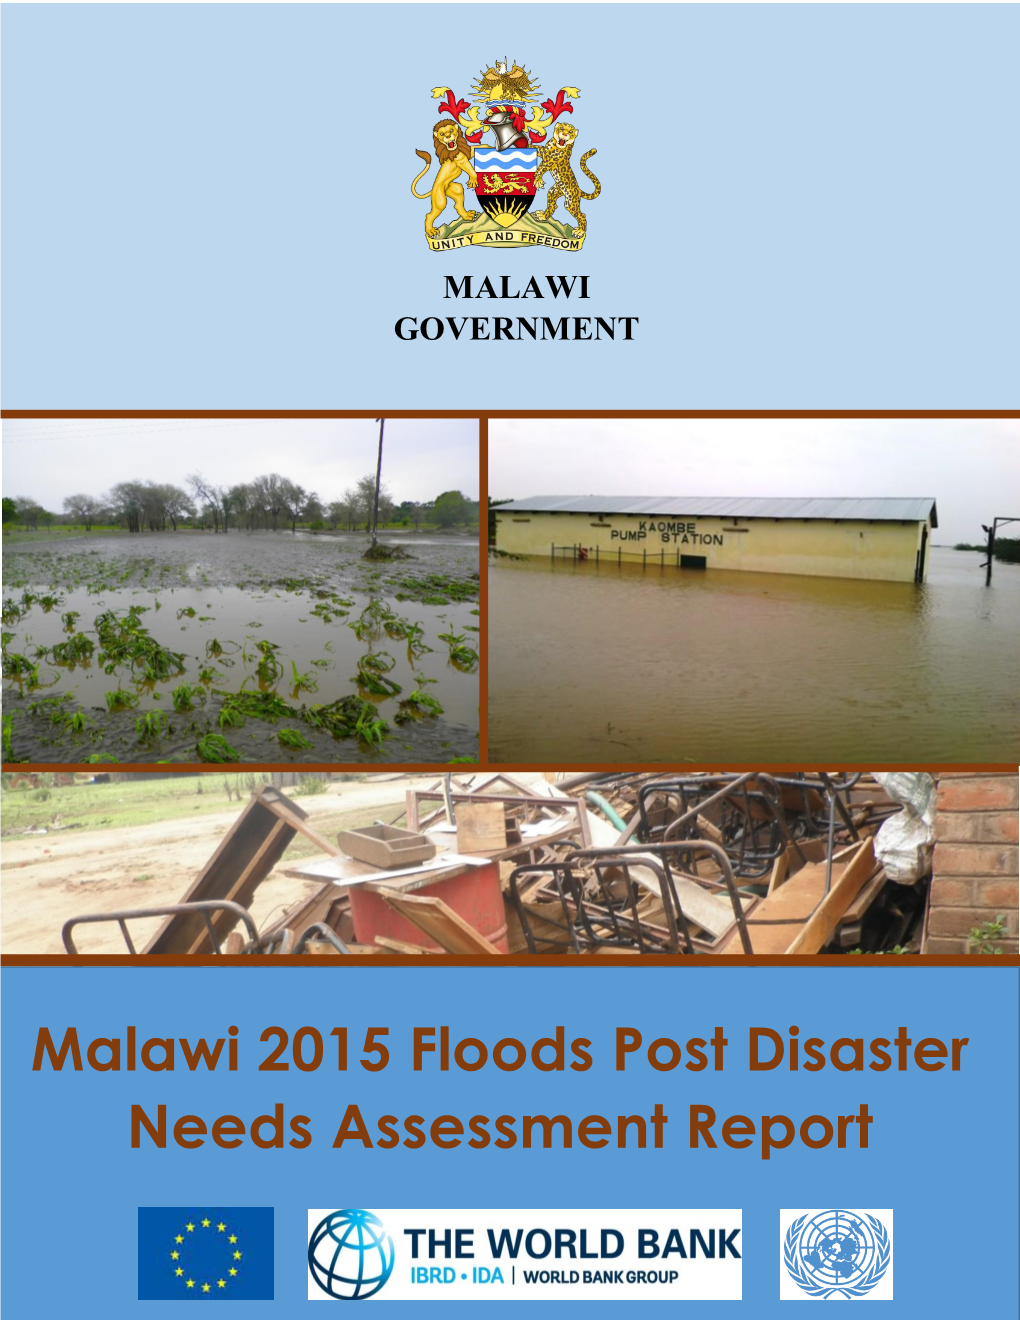 Malawi 2015 Floods Post Disaster Needs Assessment Report